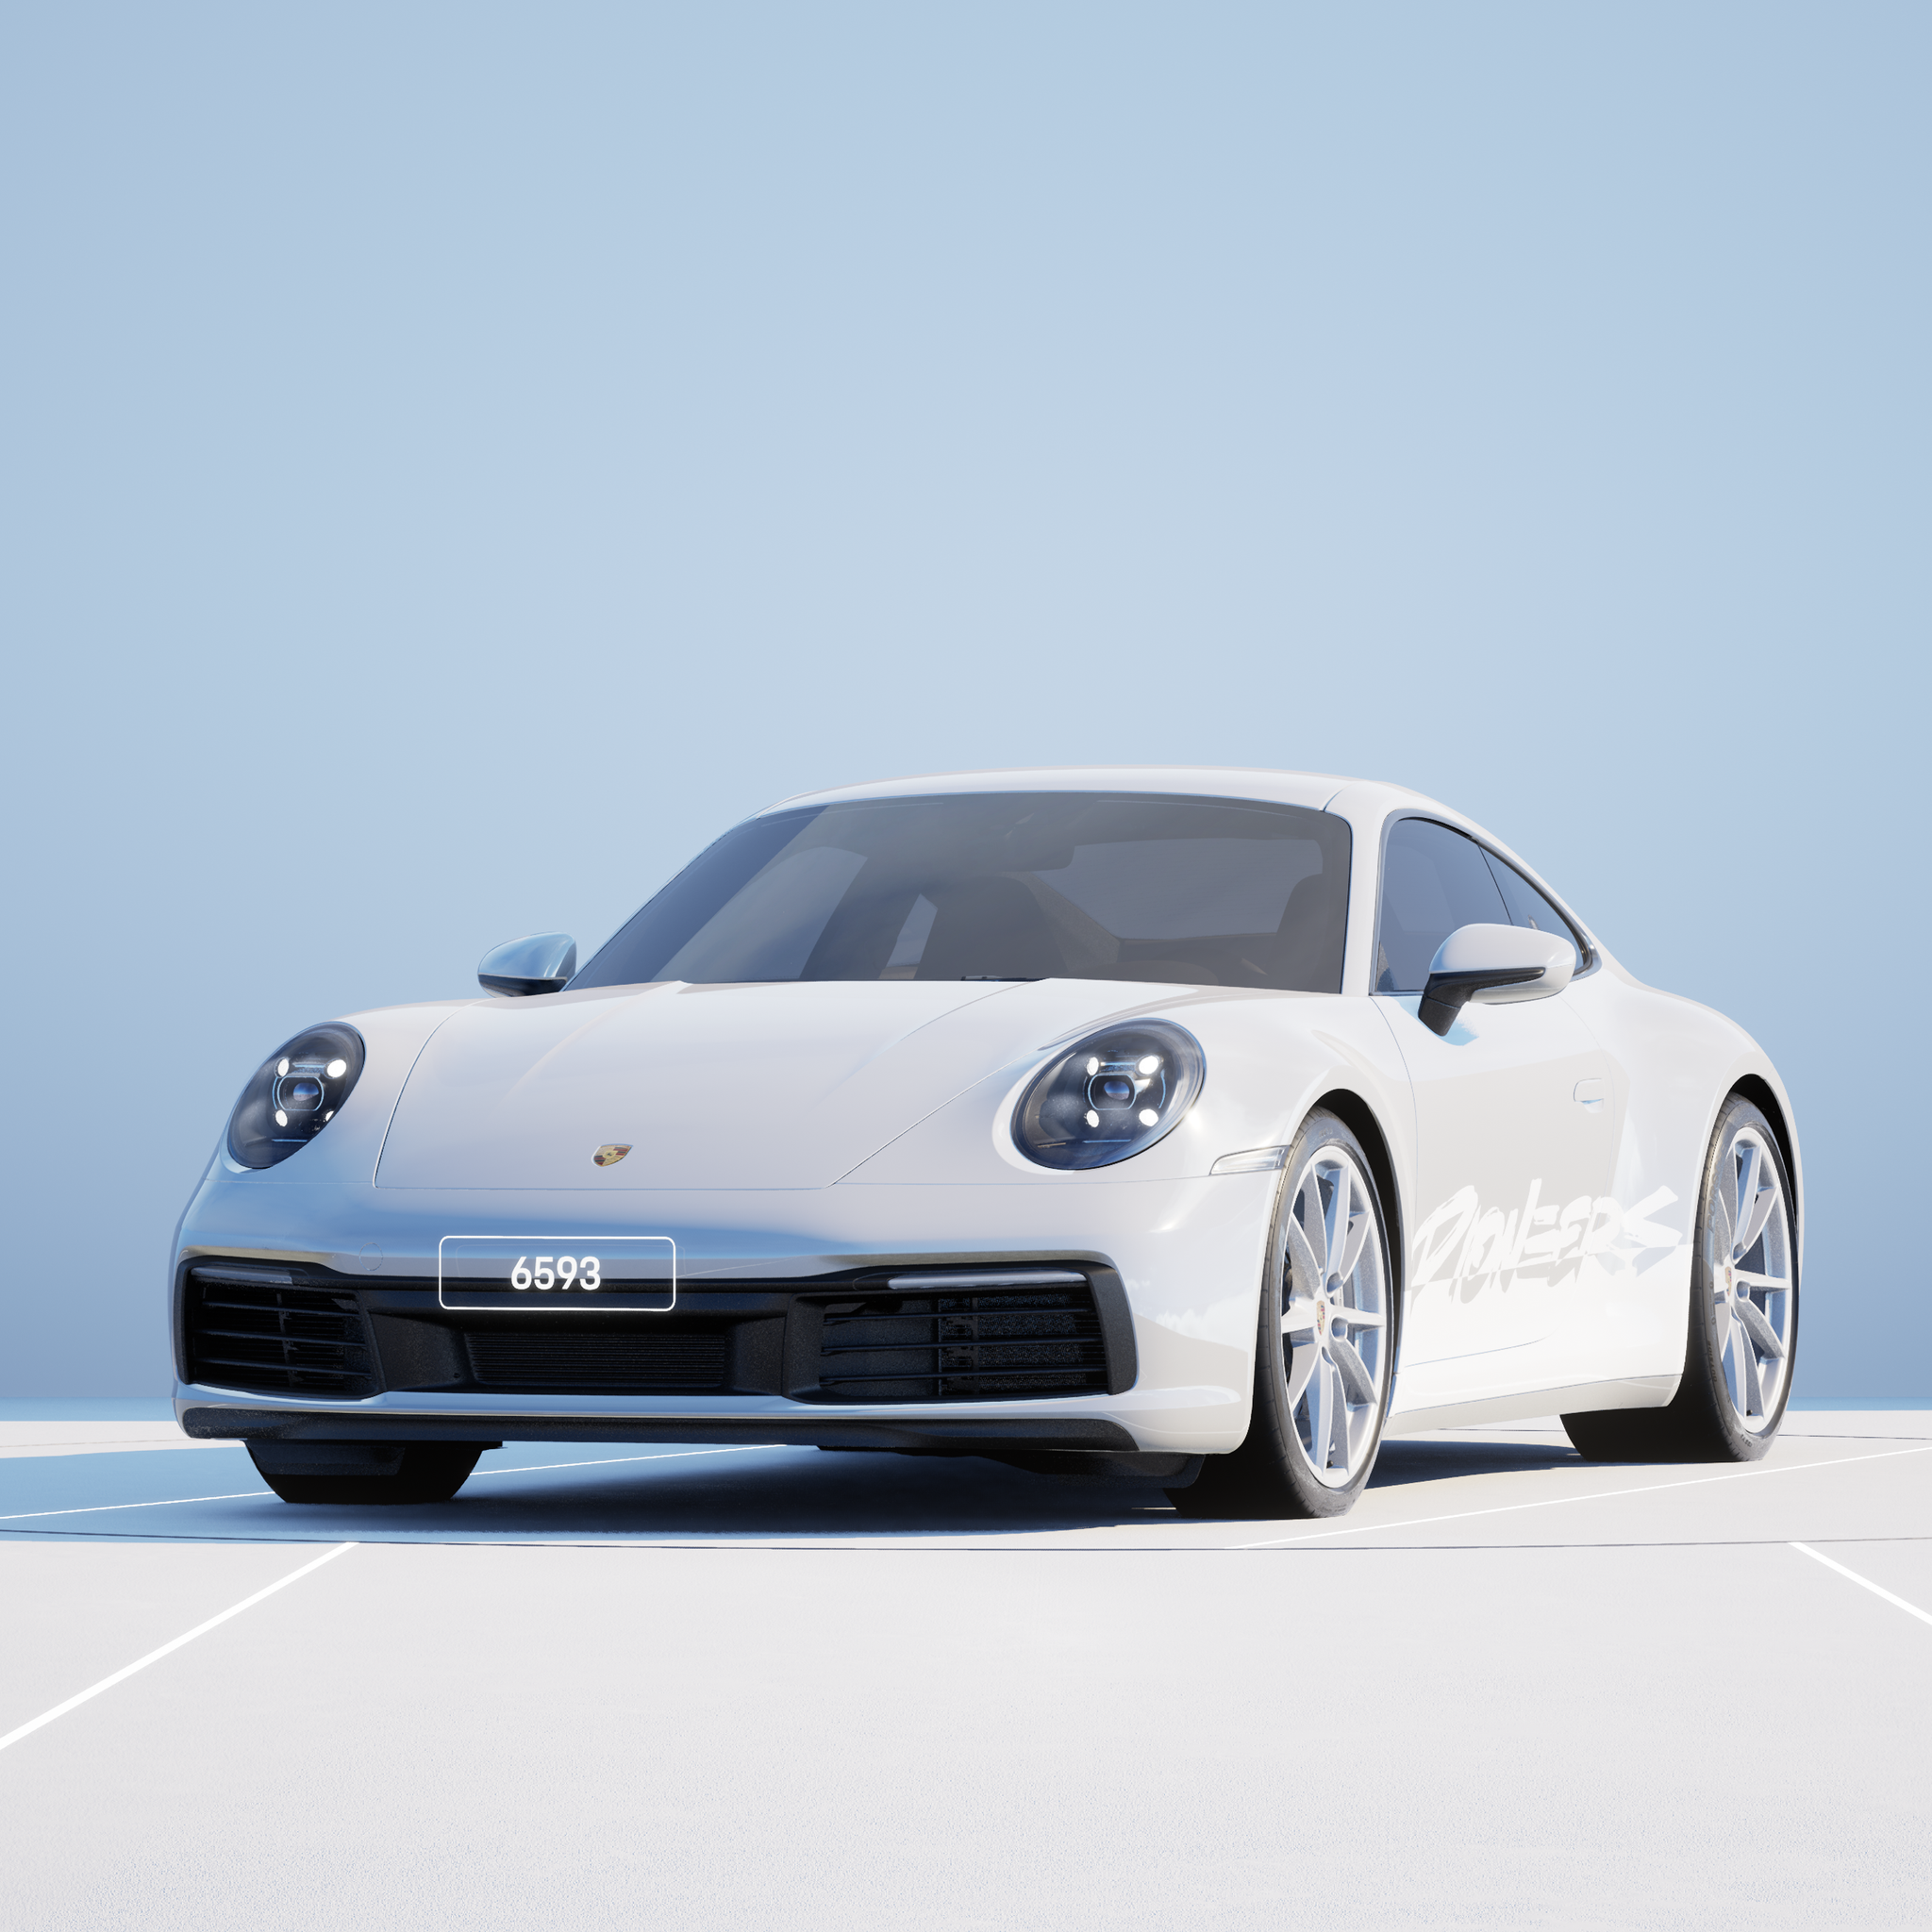 The PORSCHΞ 911 6593 image in phase